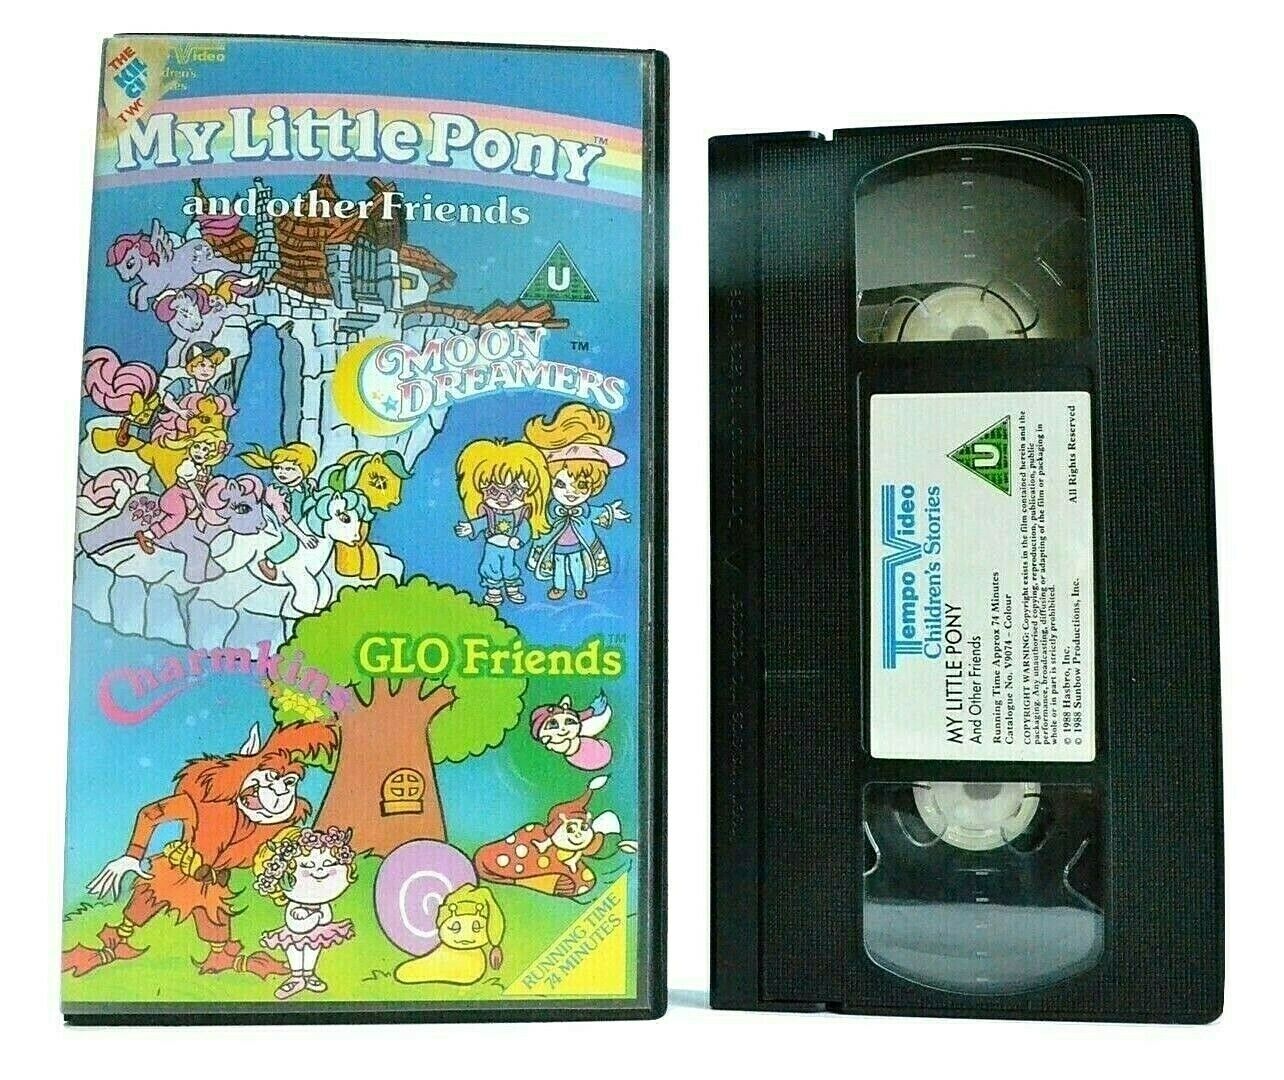 My Little Pony And Friends: Moon Dreamers - Charmkins - Animated - Kids - VHS-